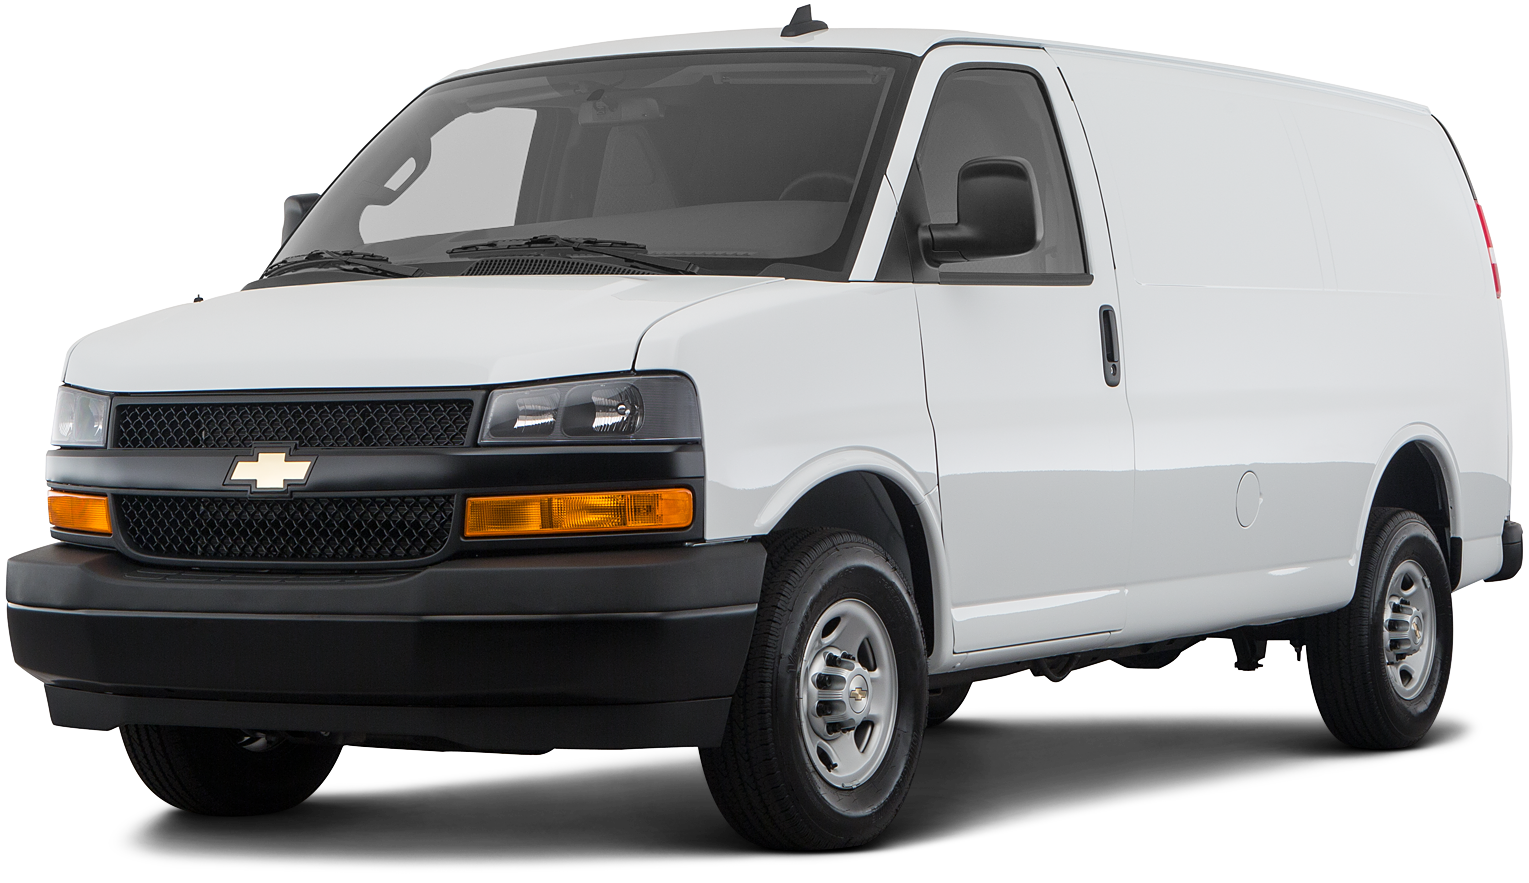 2020 Chevrolet Express 2500 Incentives, Specials & Offers in PHOENIX AZ